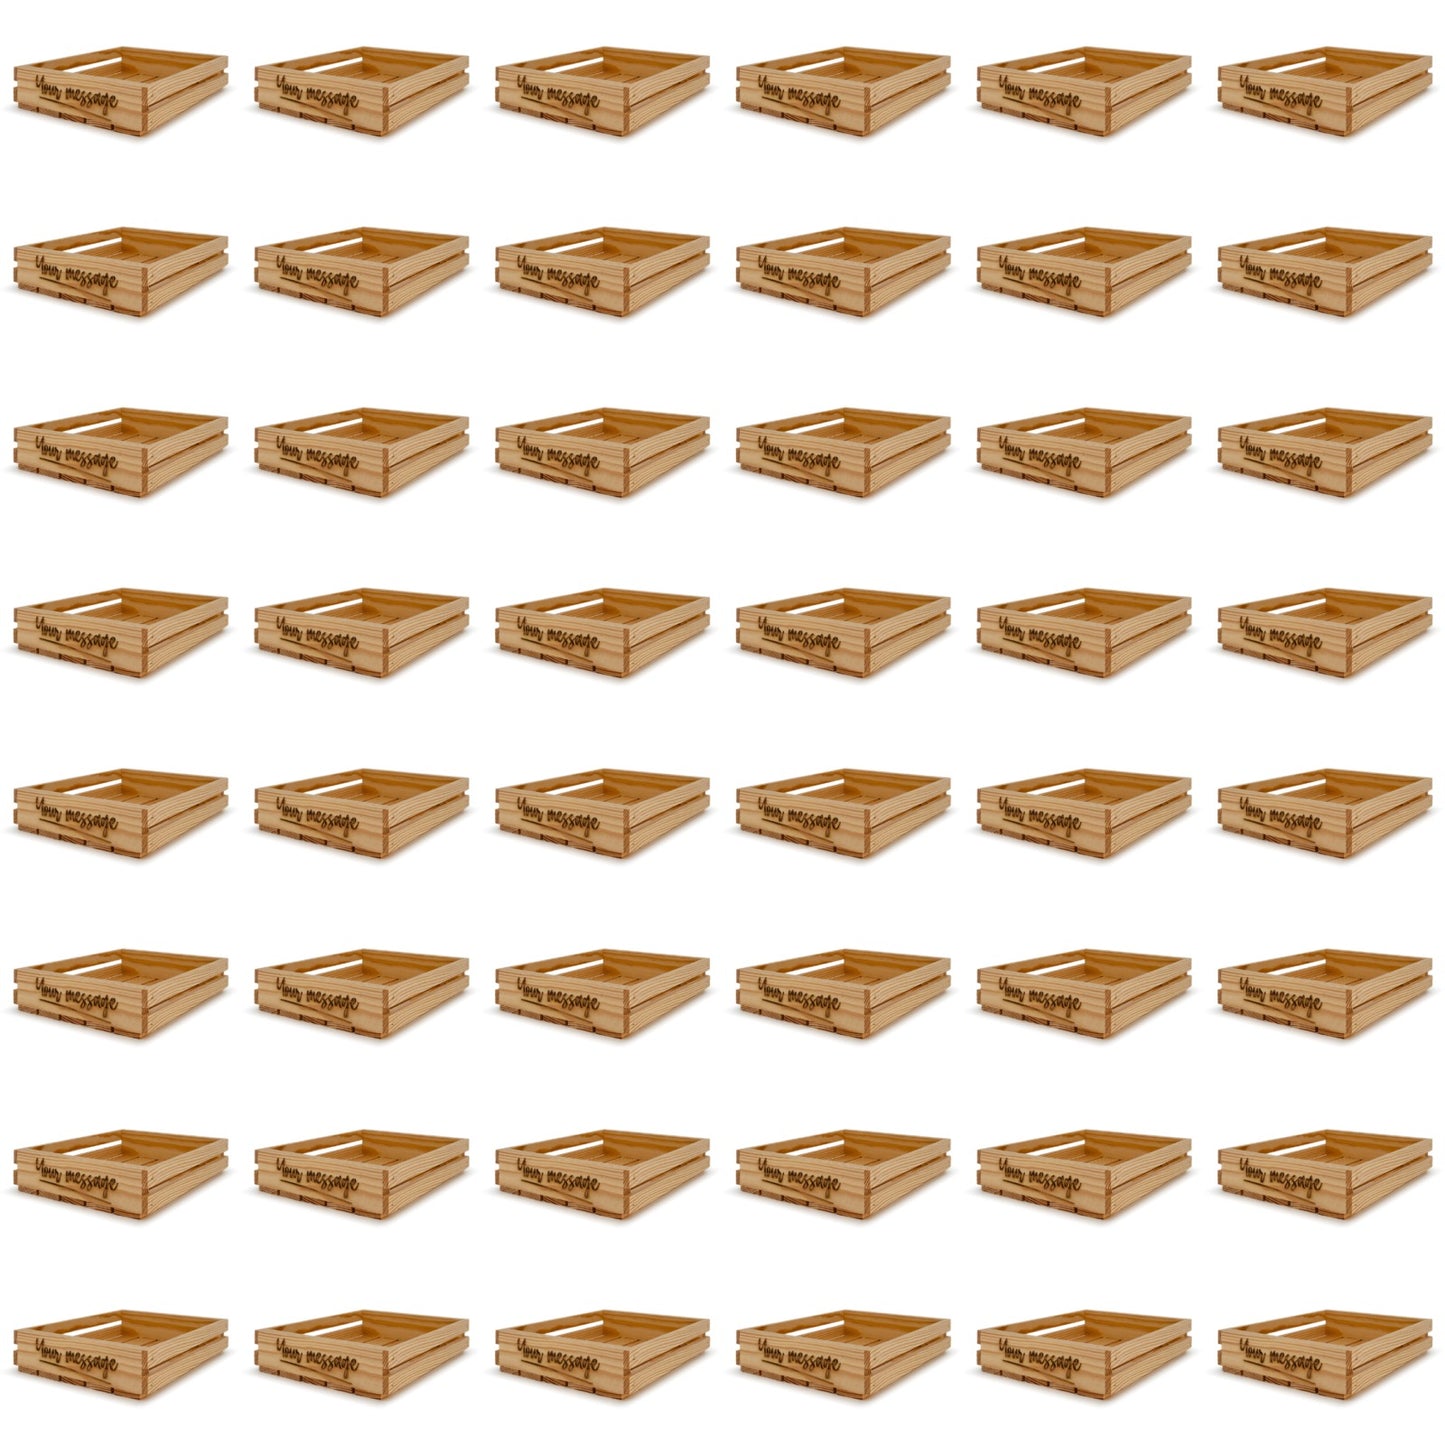 48 Small wooden crates 12x10x2.5 your message included